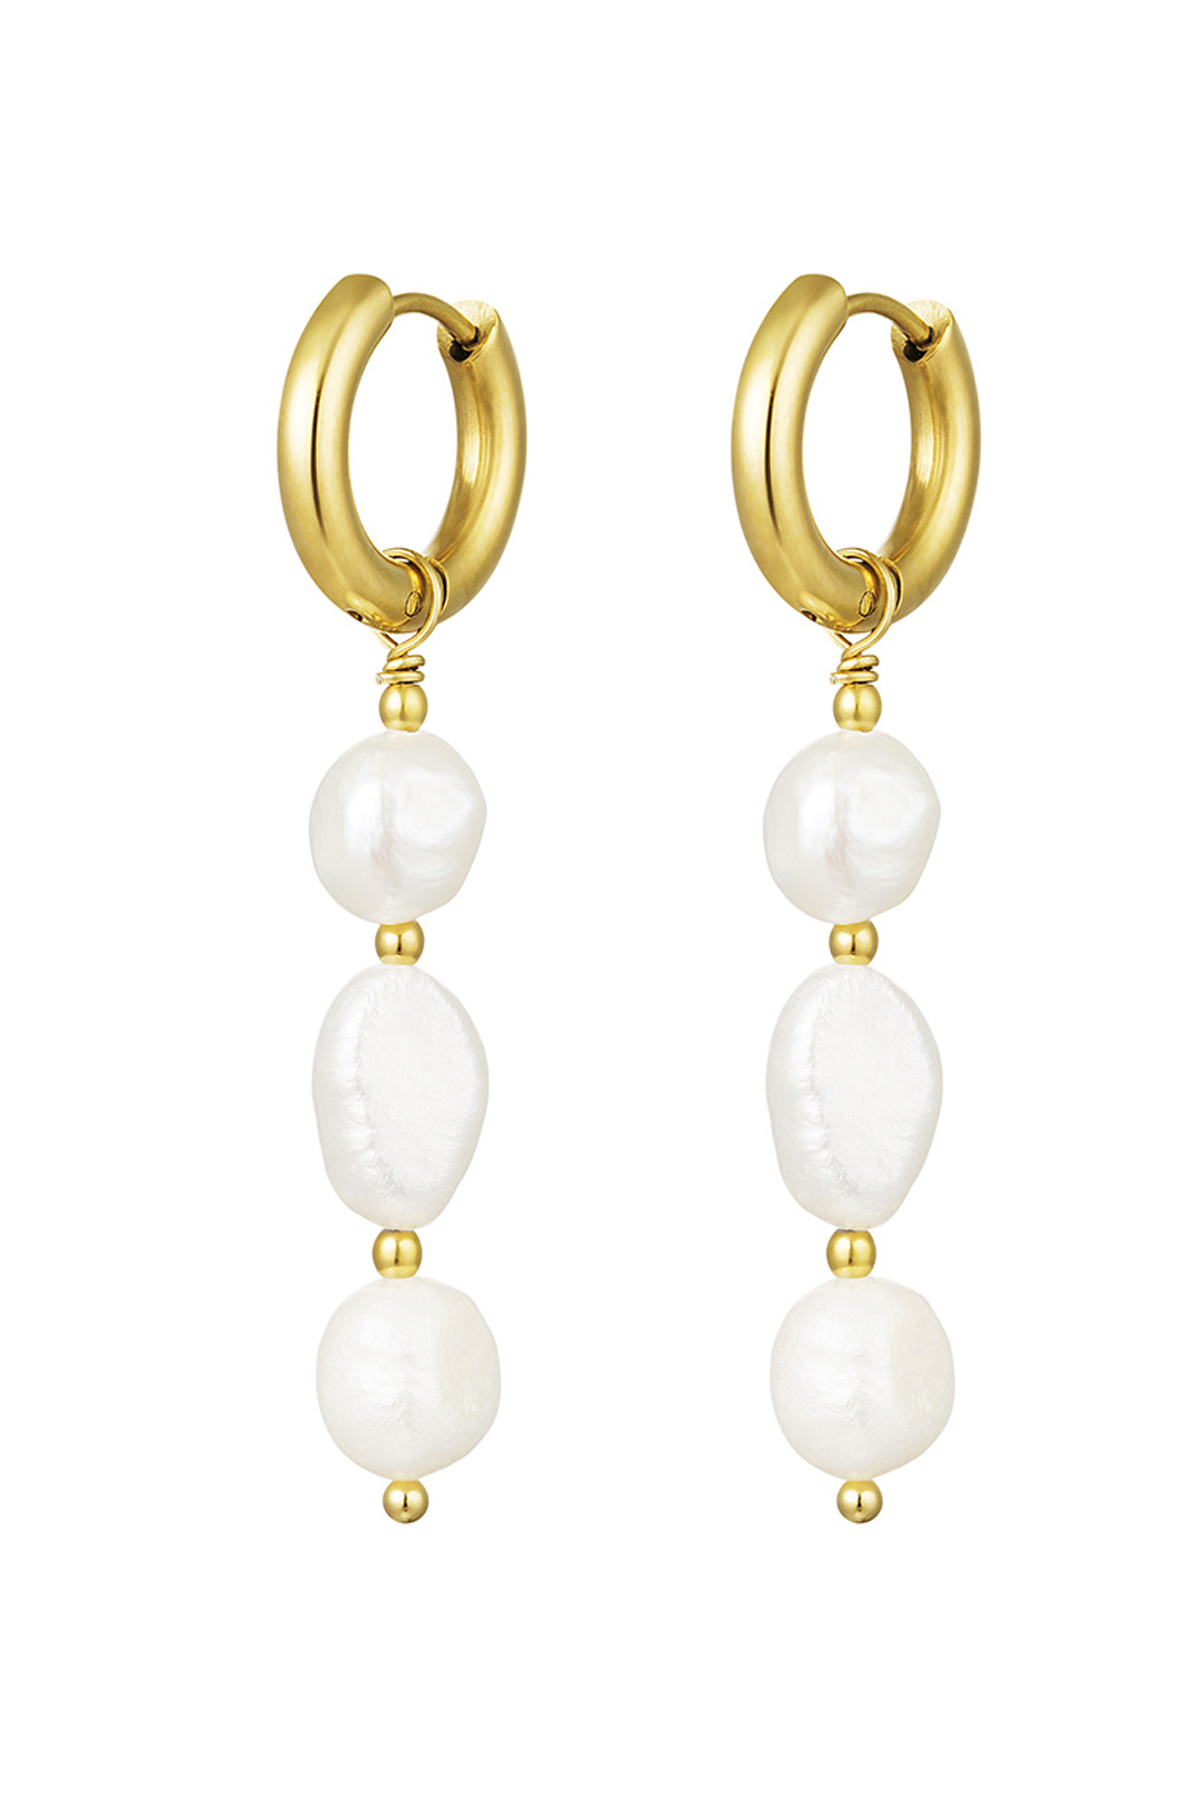 Earrings pearl party - gold Stainless Steel 